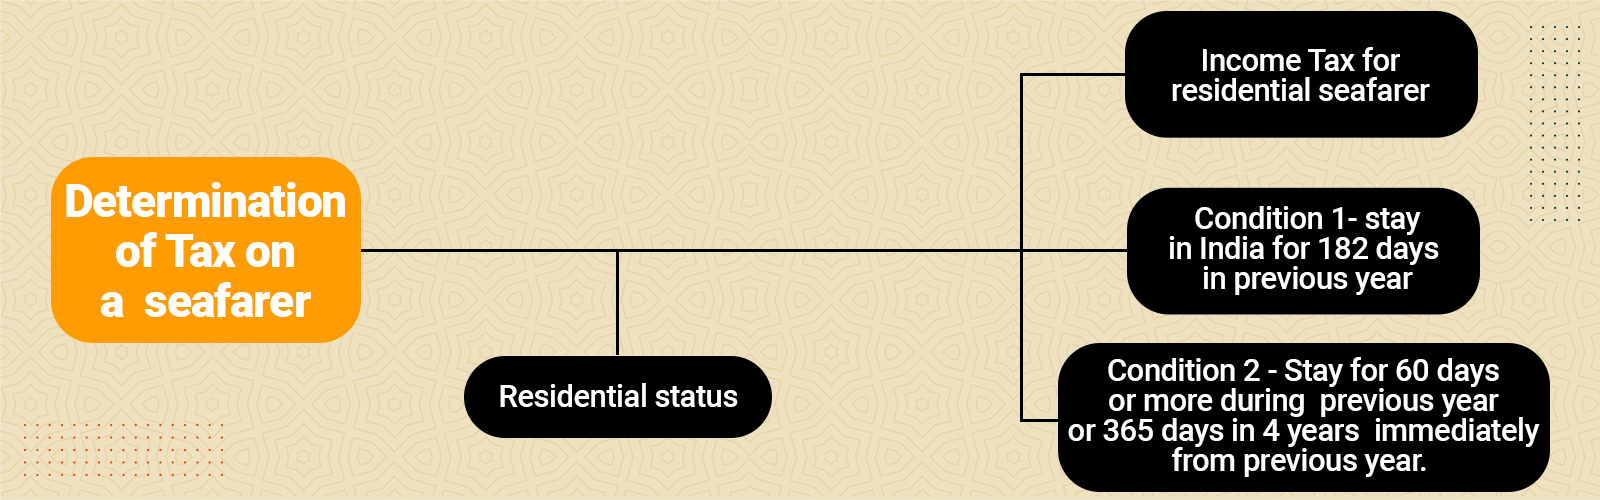 residential status of an individual